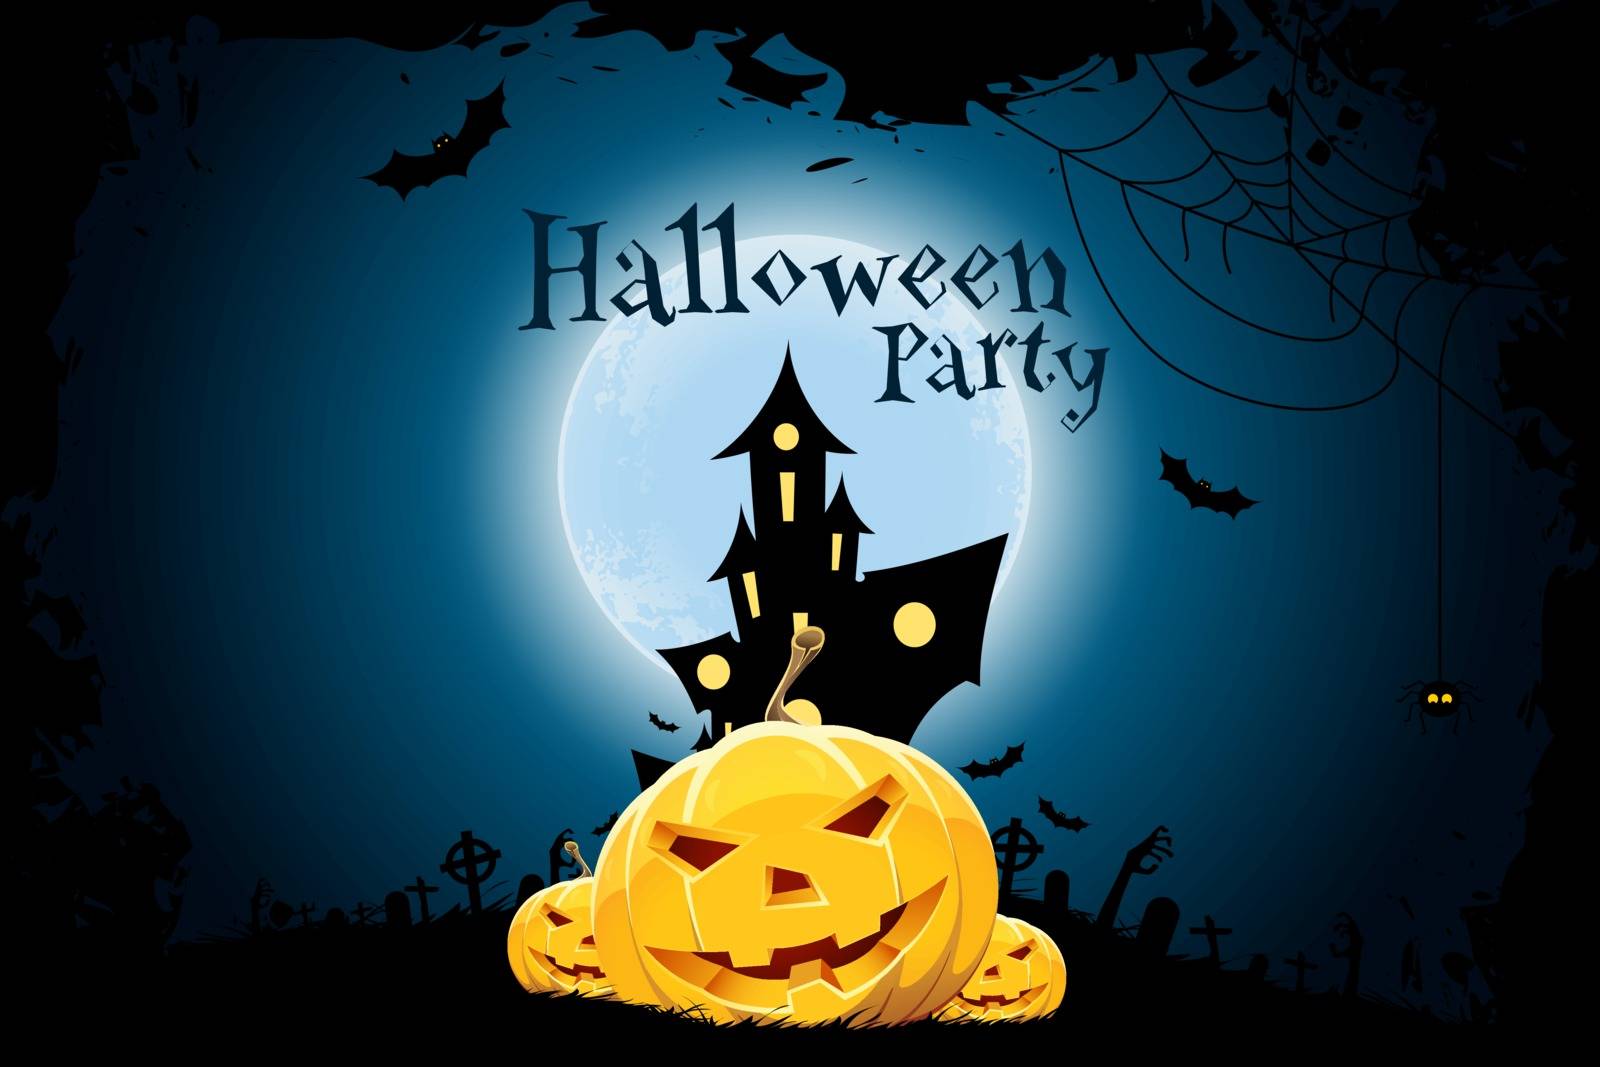 Grungy Halloween Party Background by WaD